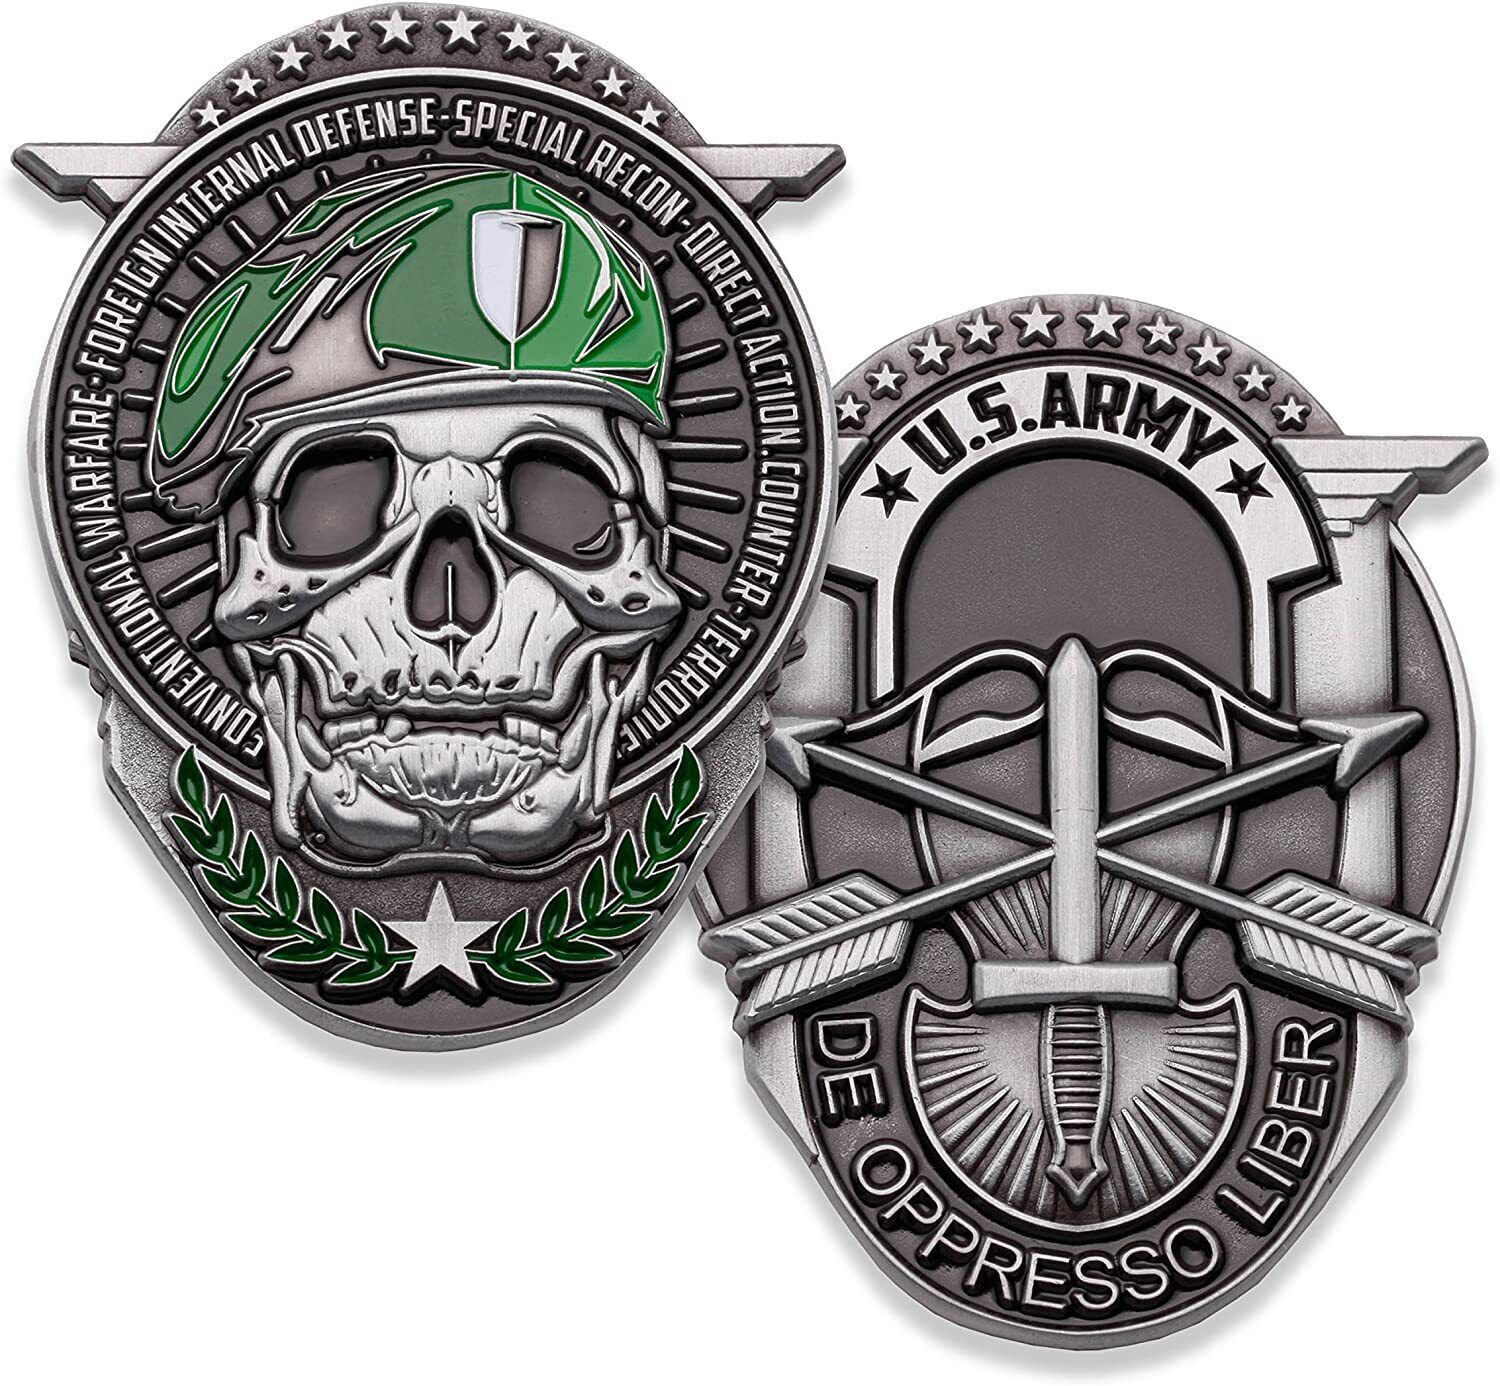 United States Army Special Forces Challenge Coin